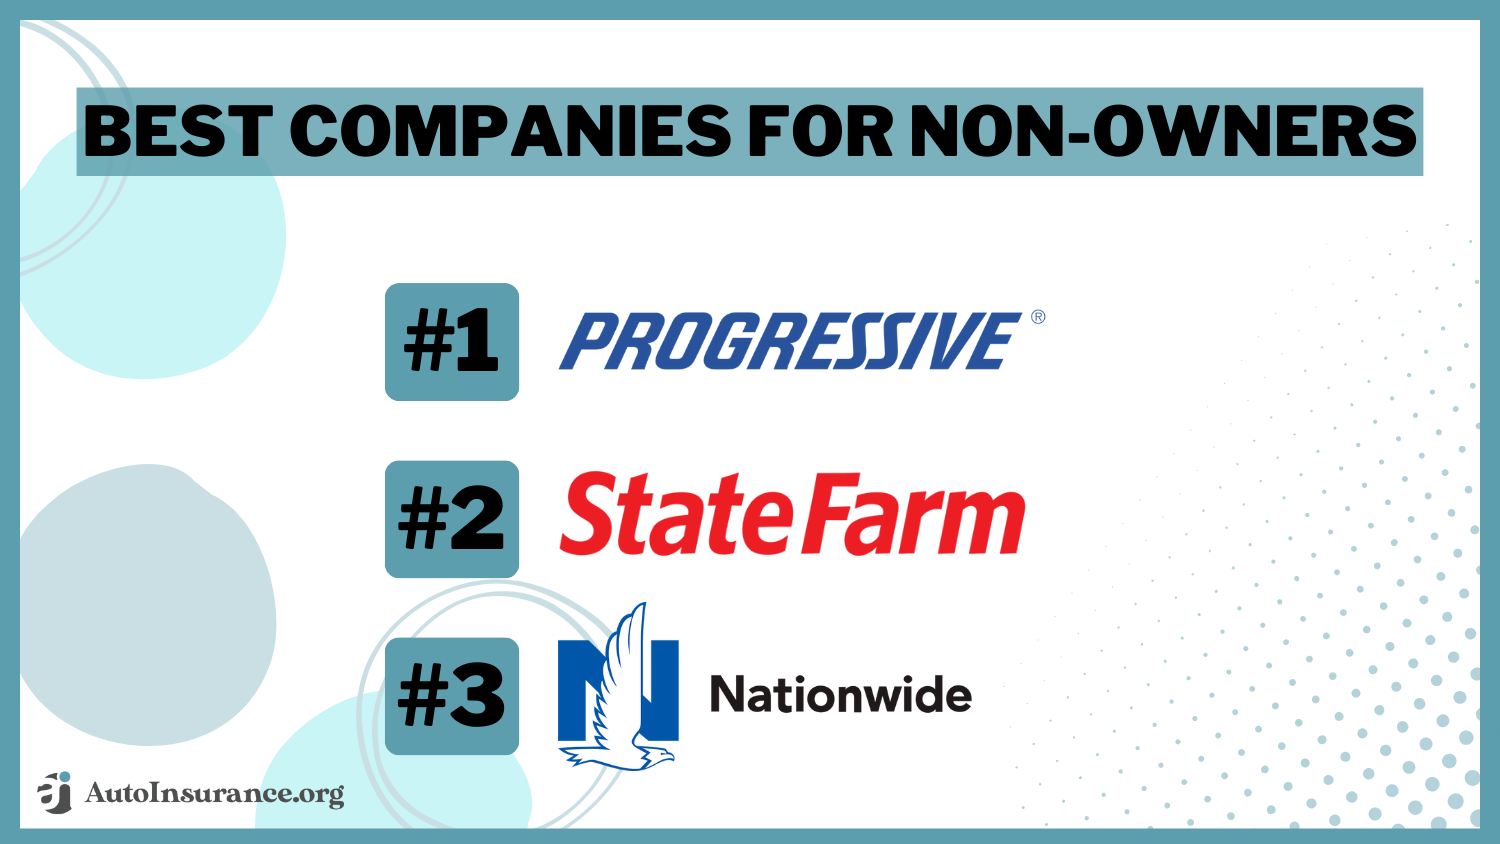 Best Companies for Non-Owners: Progressive, State Farm, Nationwide 